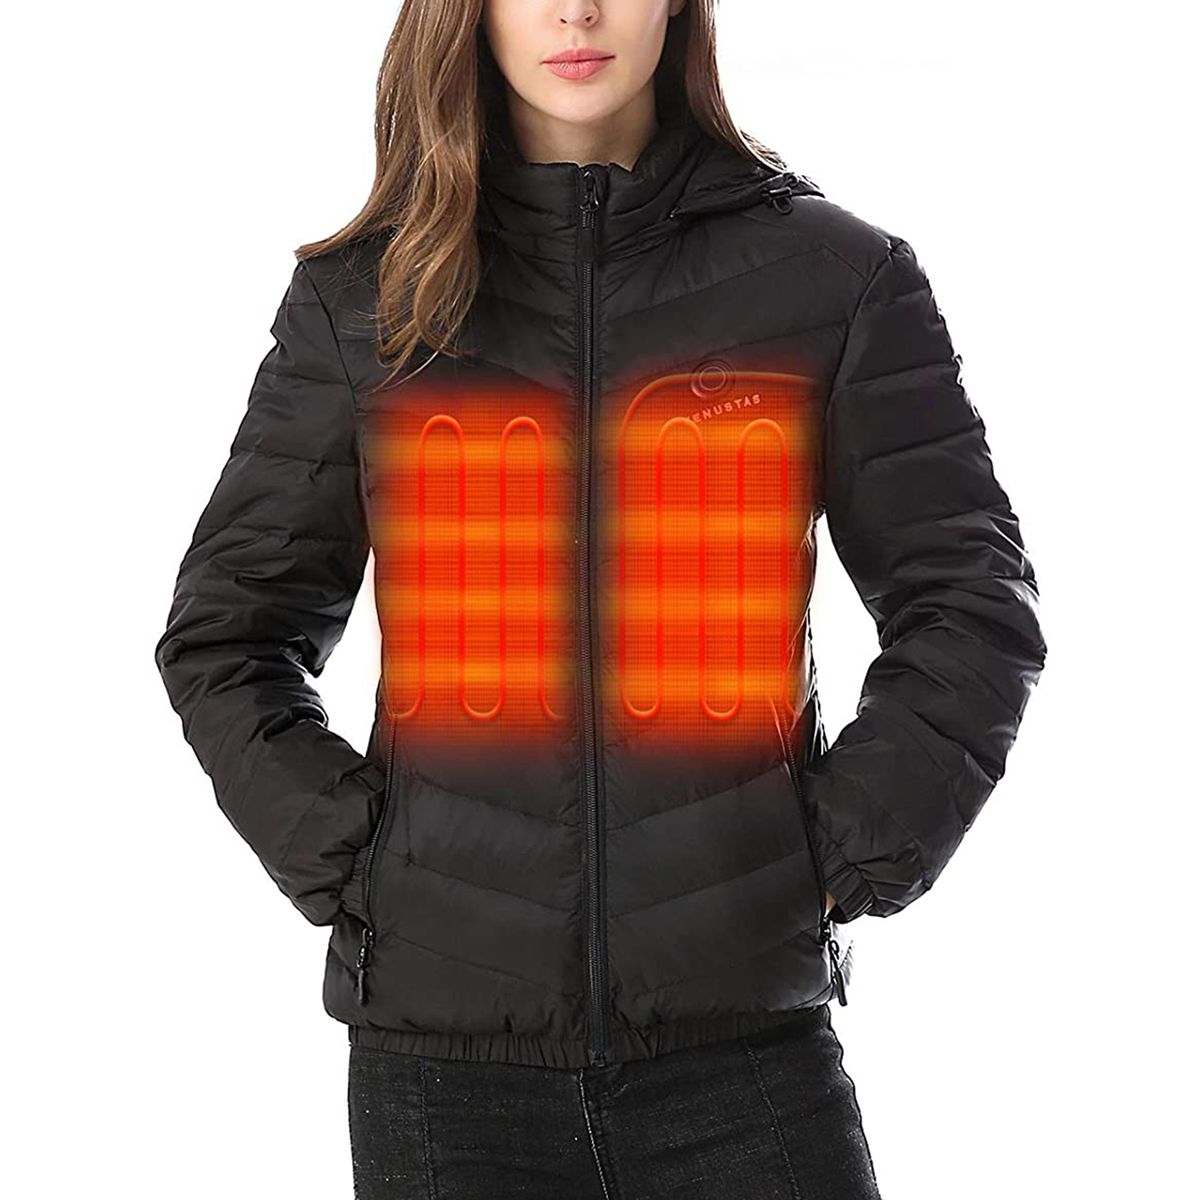 The 10 Best Heated Jackets of 2022, According to Amazon Shoppers